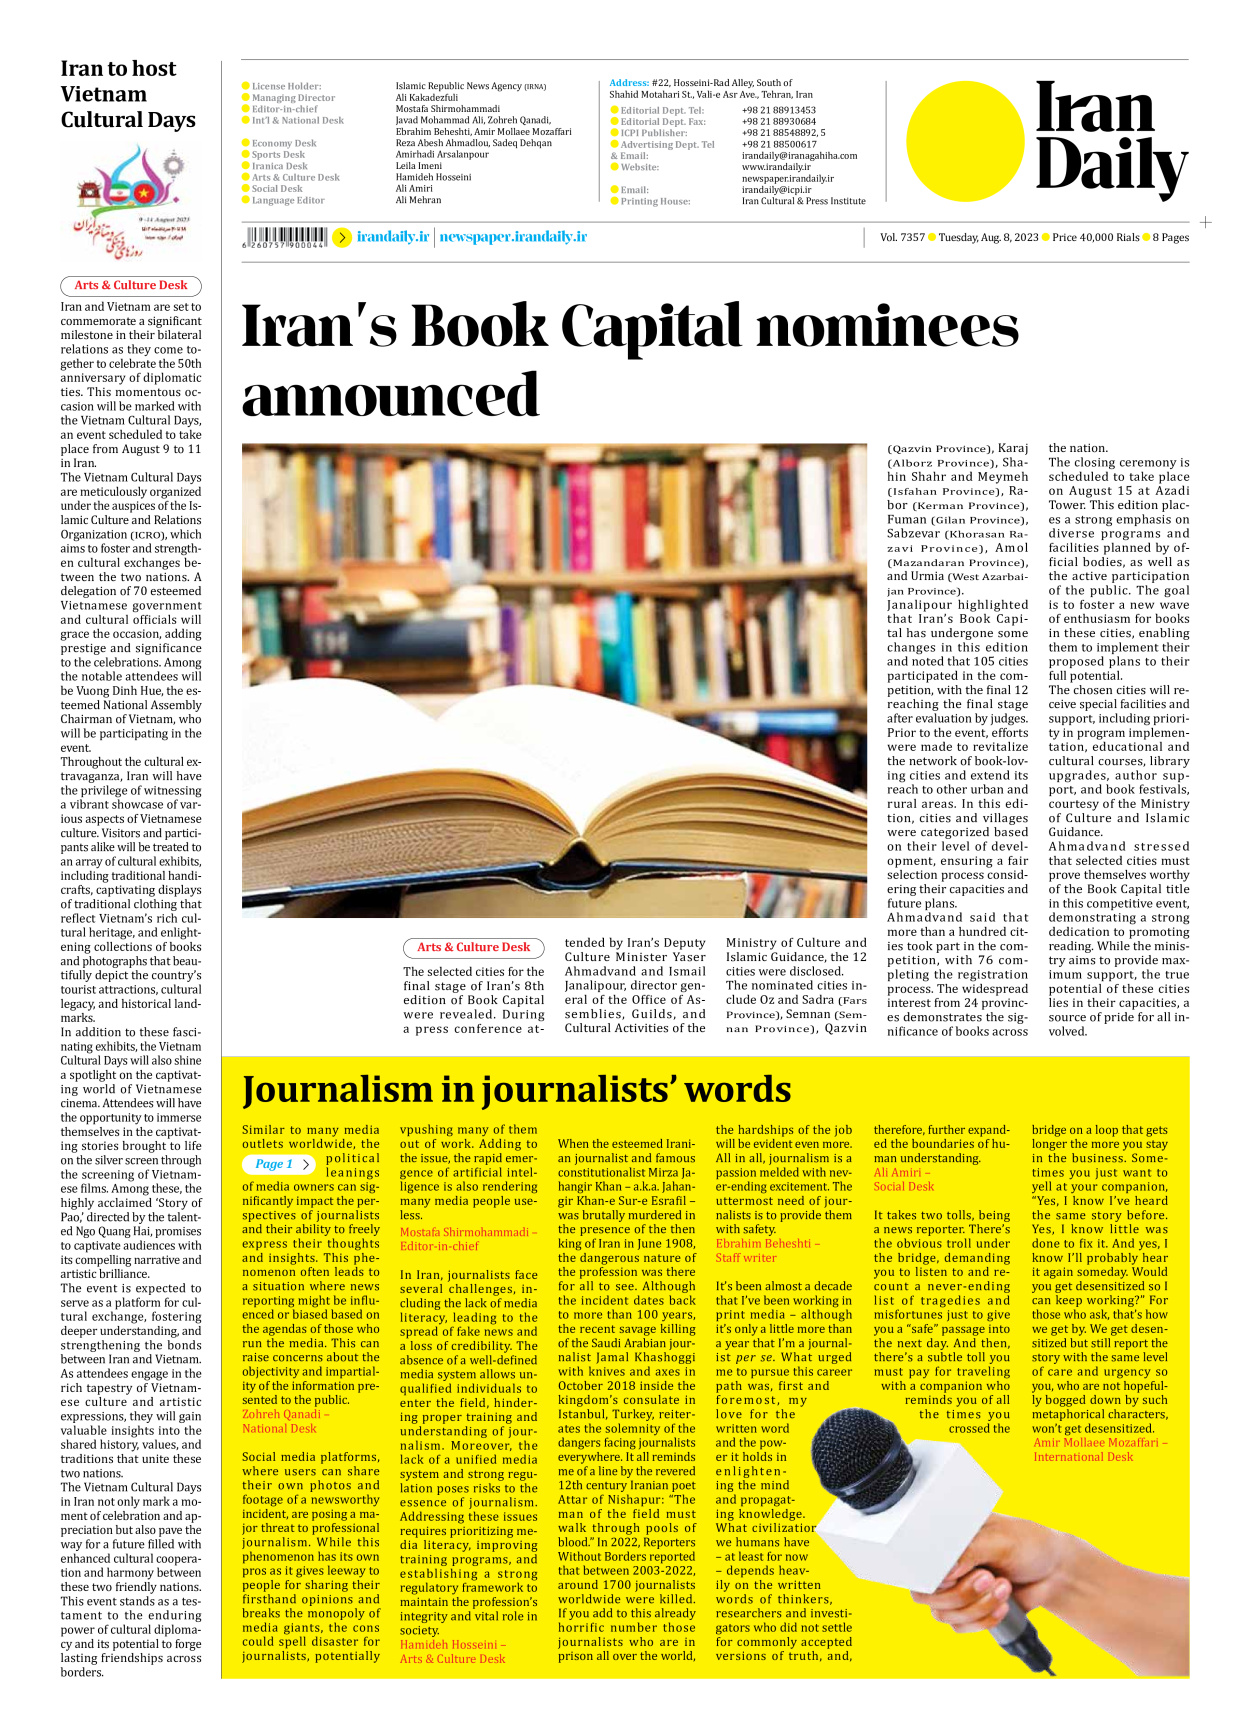 Iran Daily - Number Seven Thousand Three Hundred and Fifty Seven - 08 August 2023 - Page 8